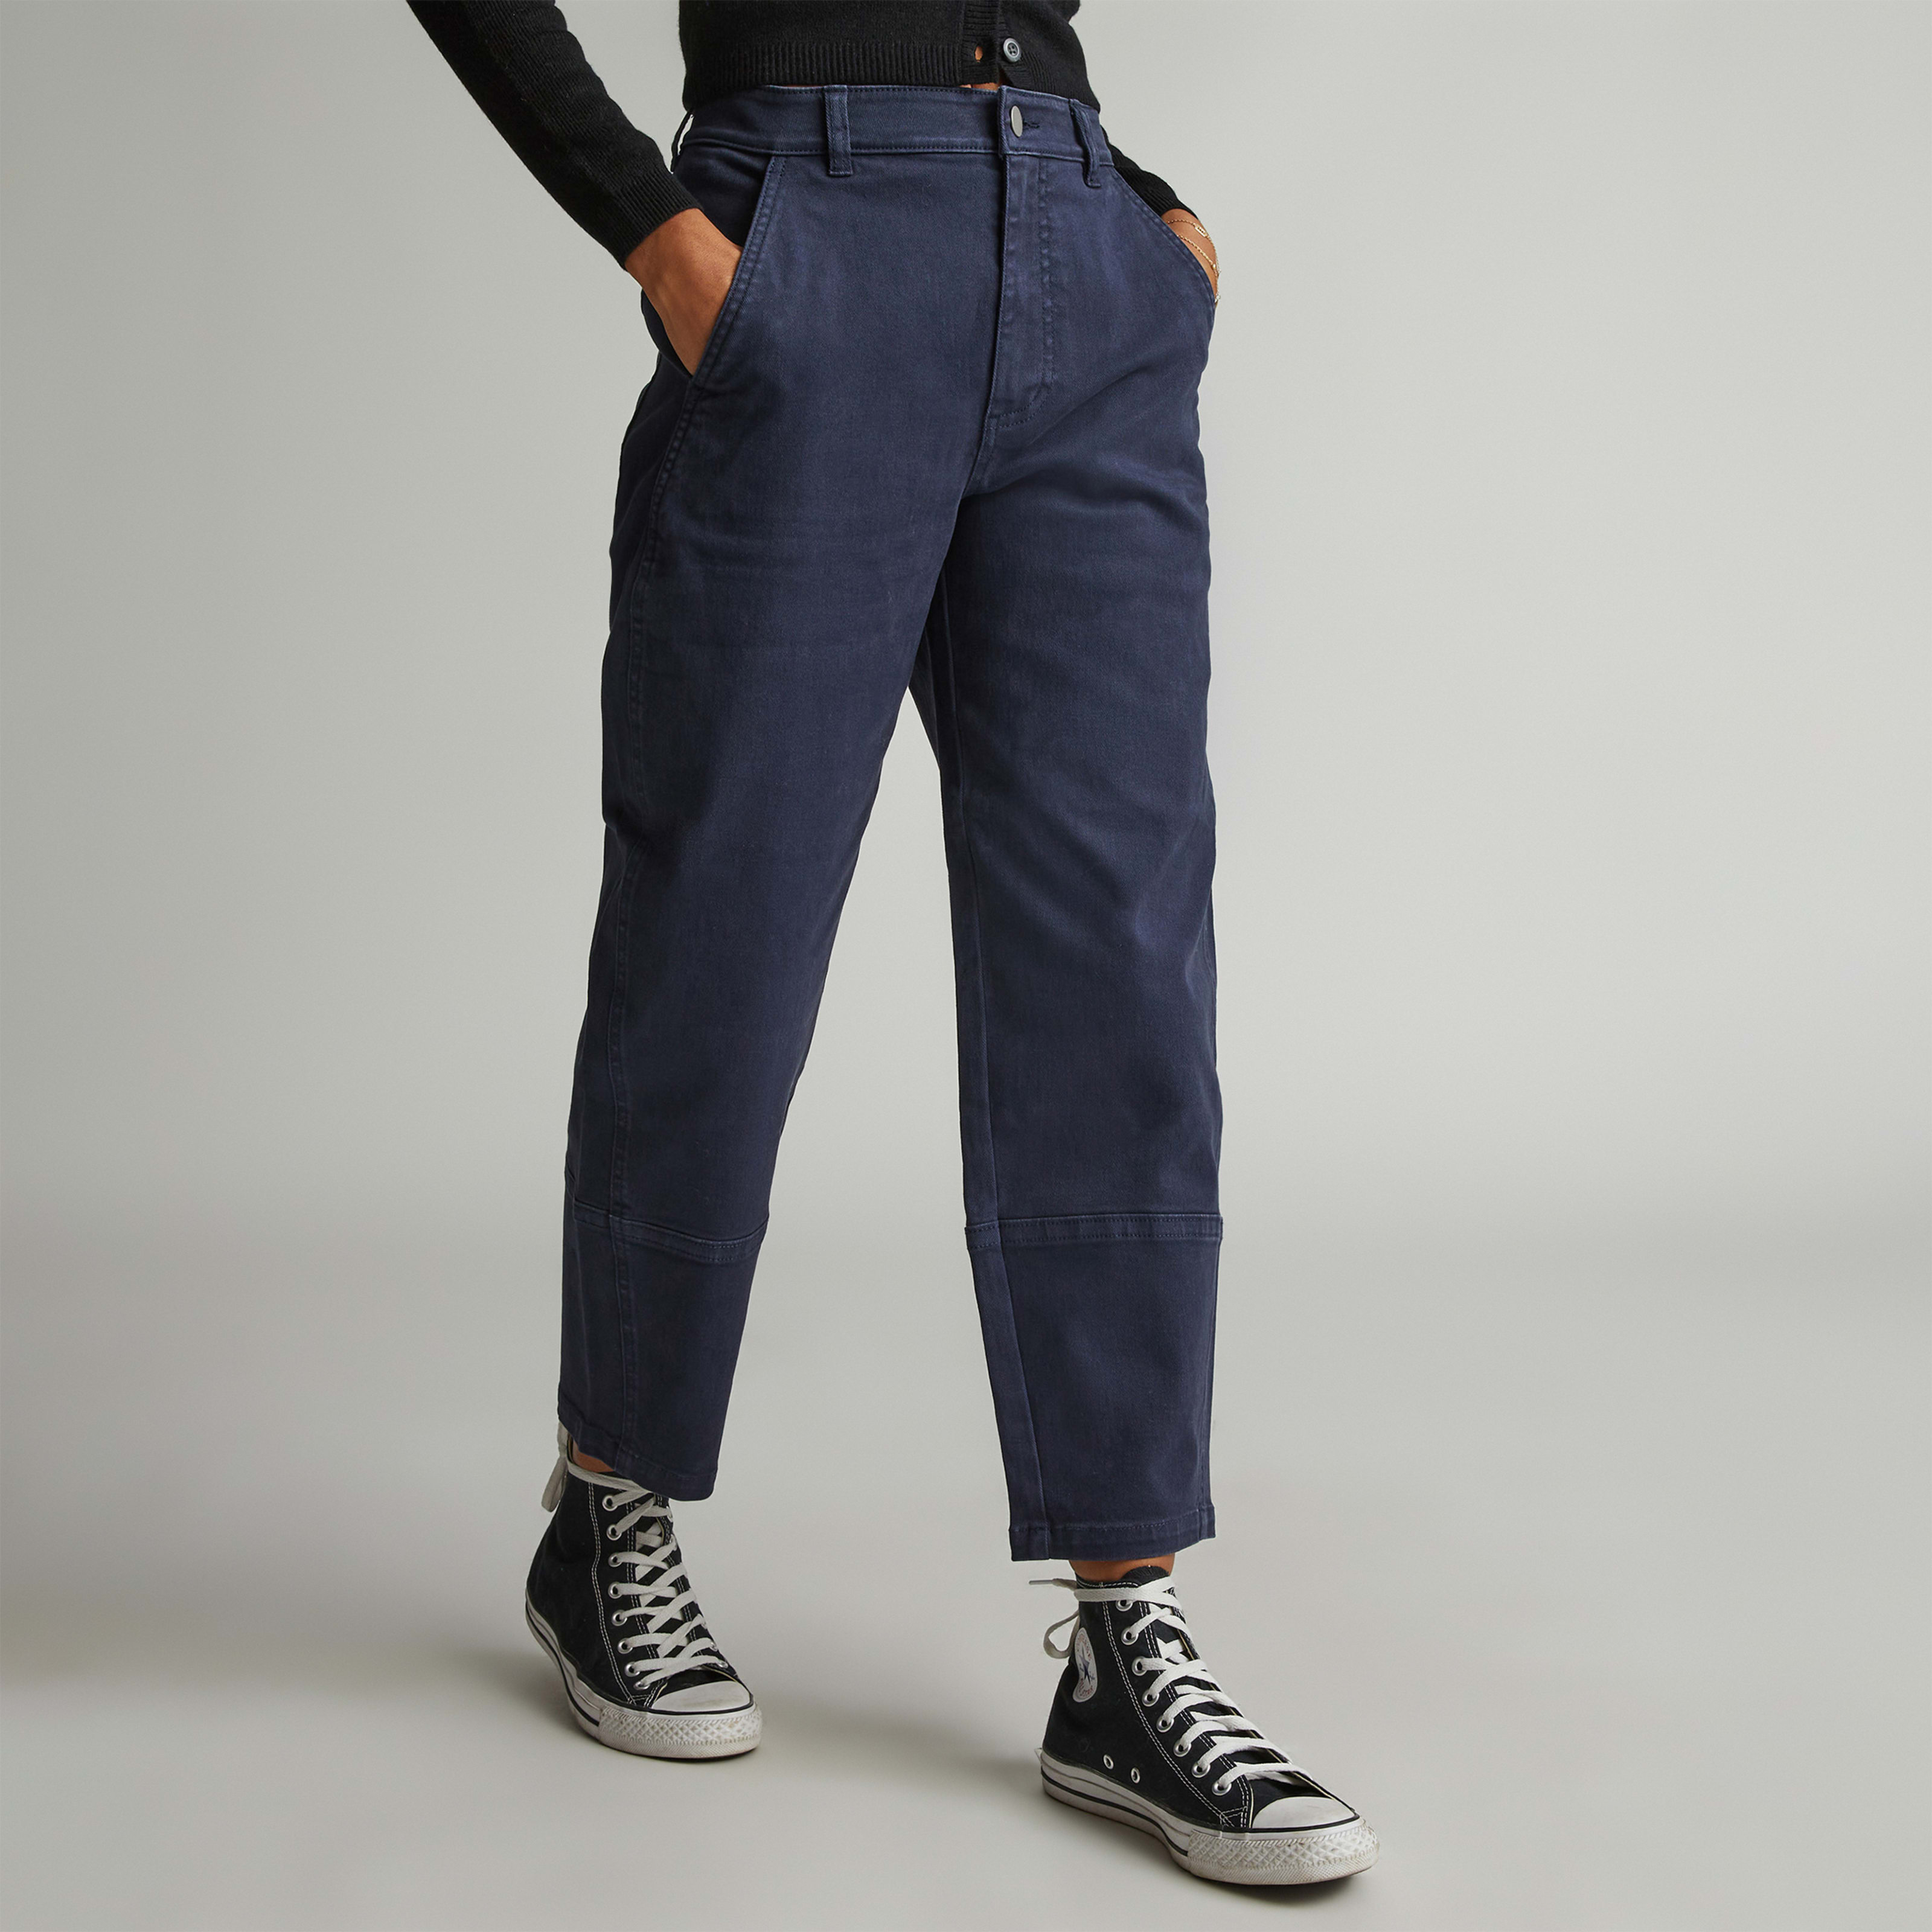 Women's Utility Barrel Pant by Everlane in Navy, Size 00